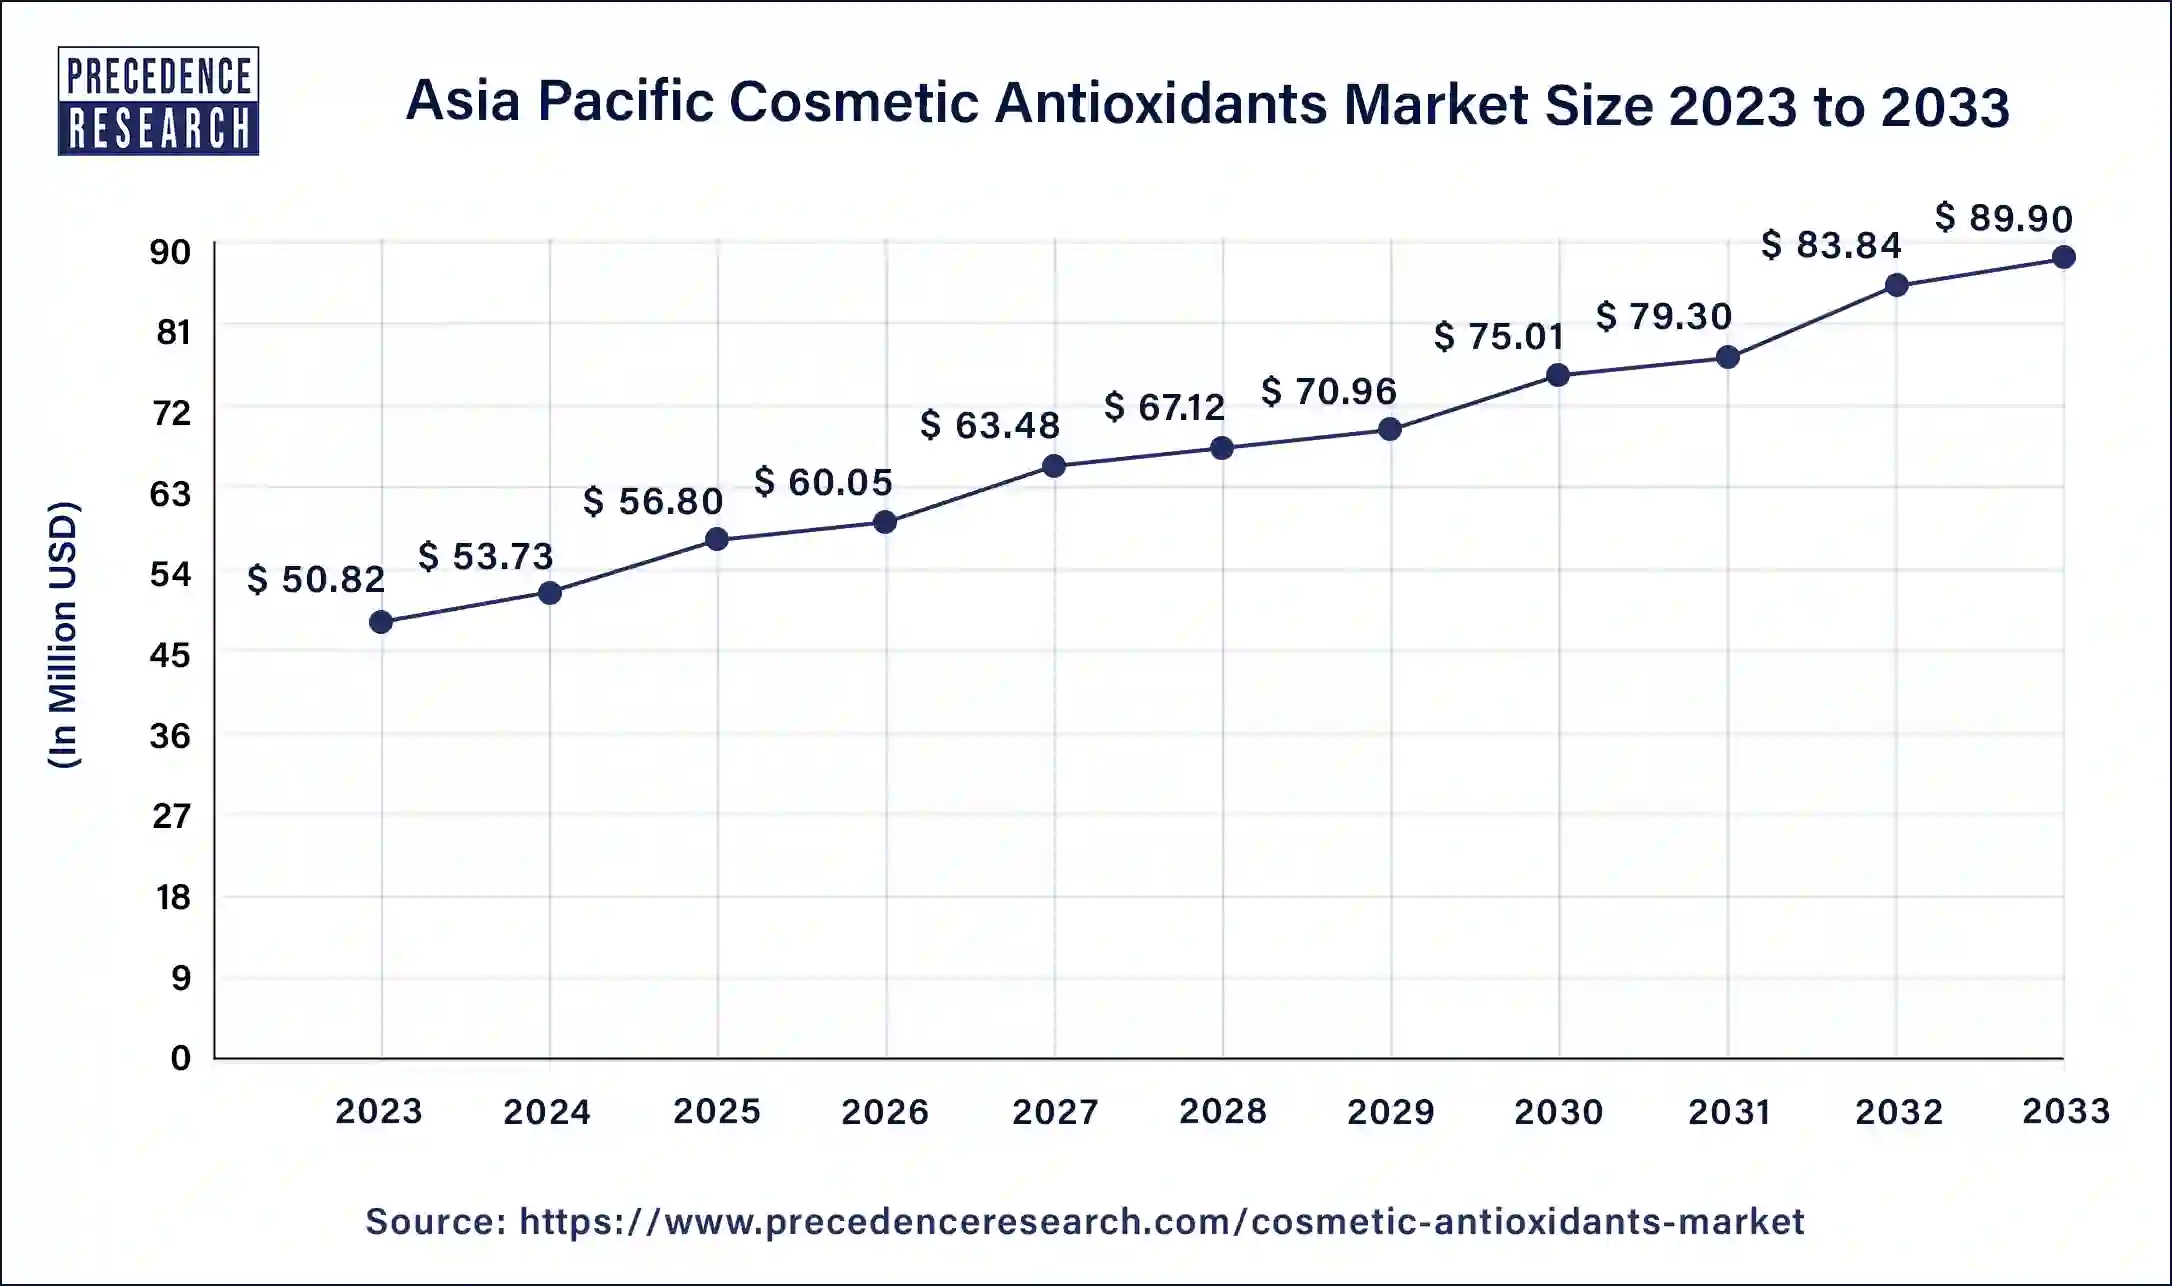 Asia Pacific Cosmetic Antioxidants Market Size 2024 to 2033